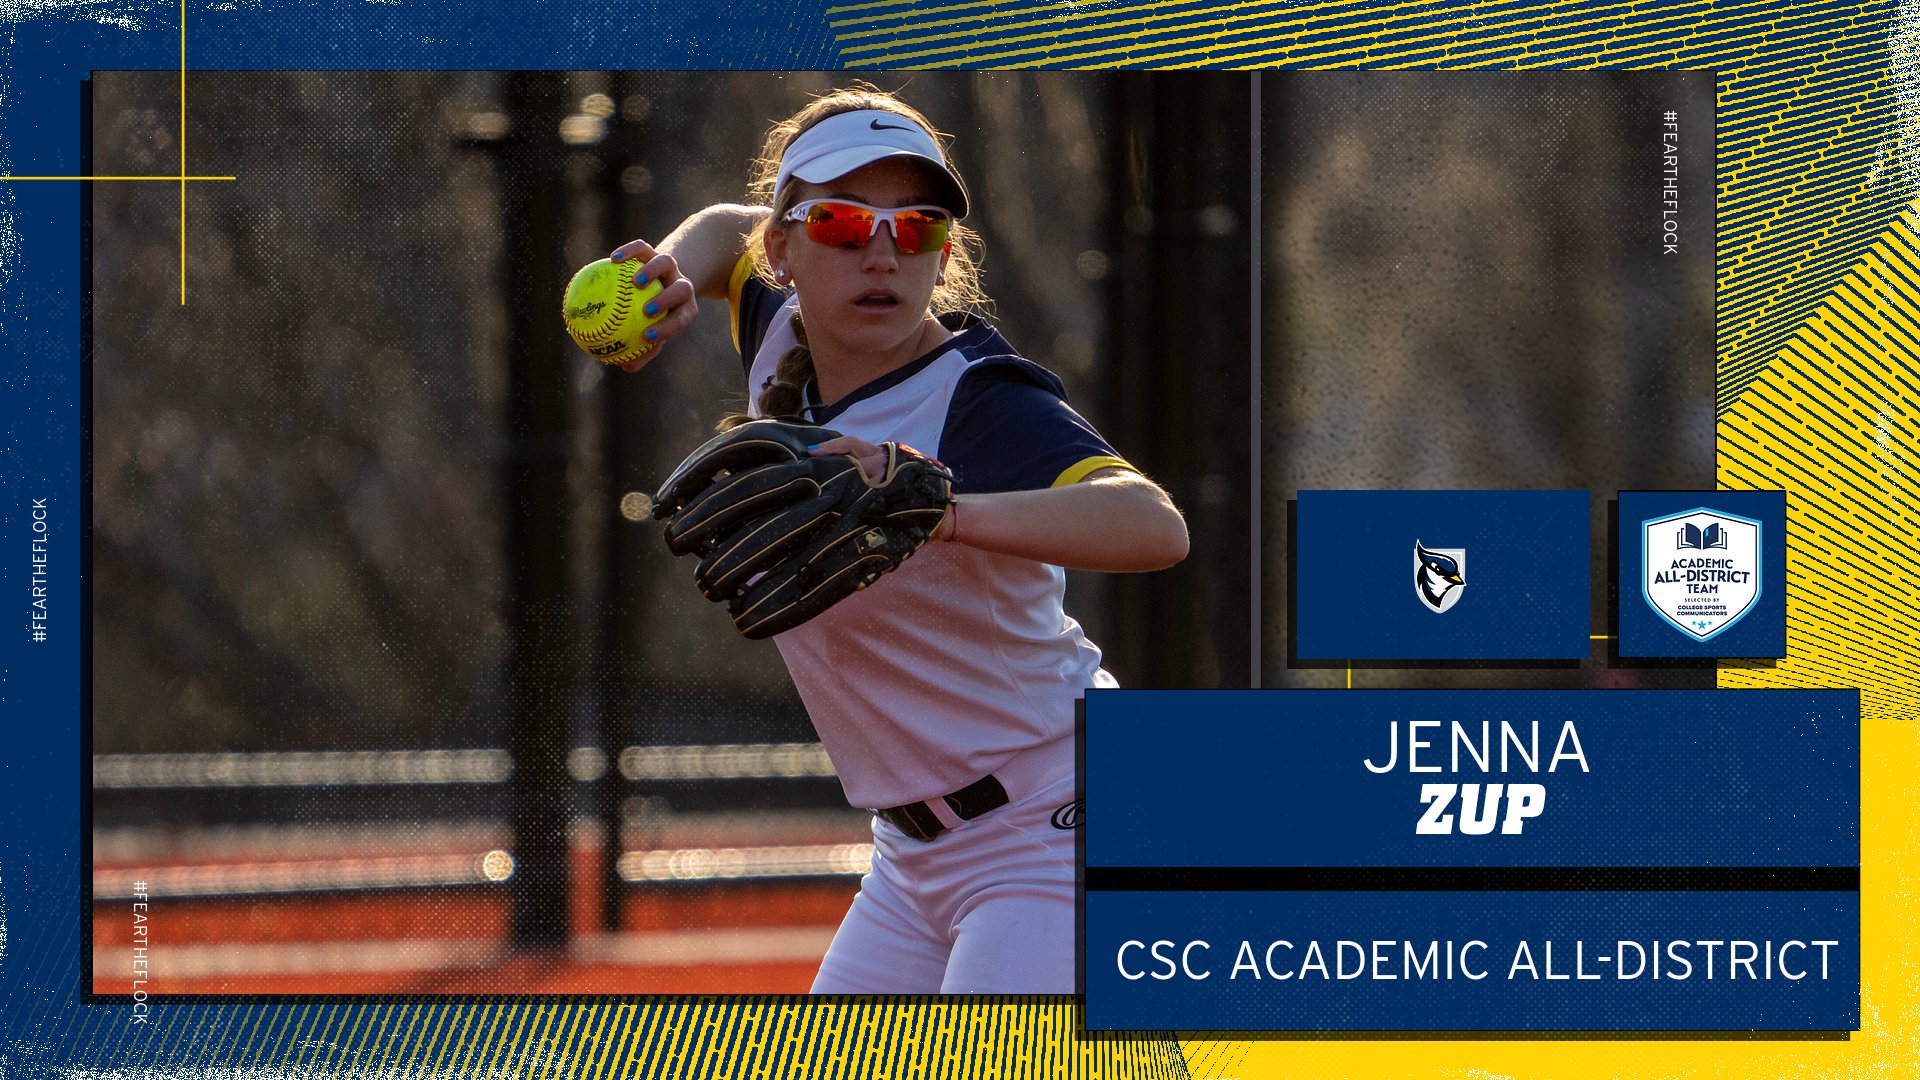 Zup Named to CSC Softball Academic All-District Team